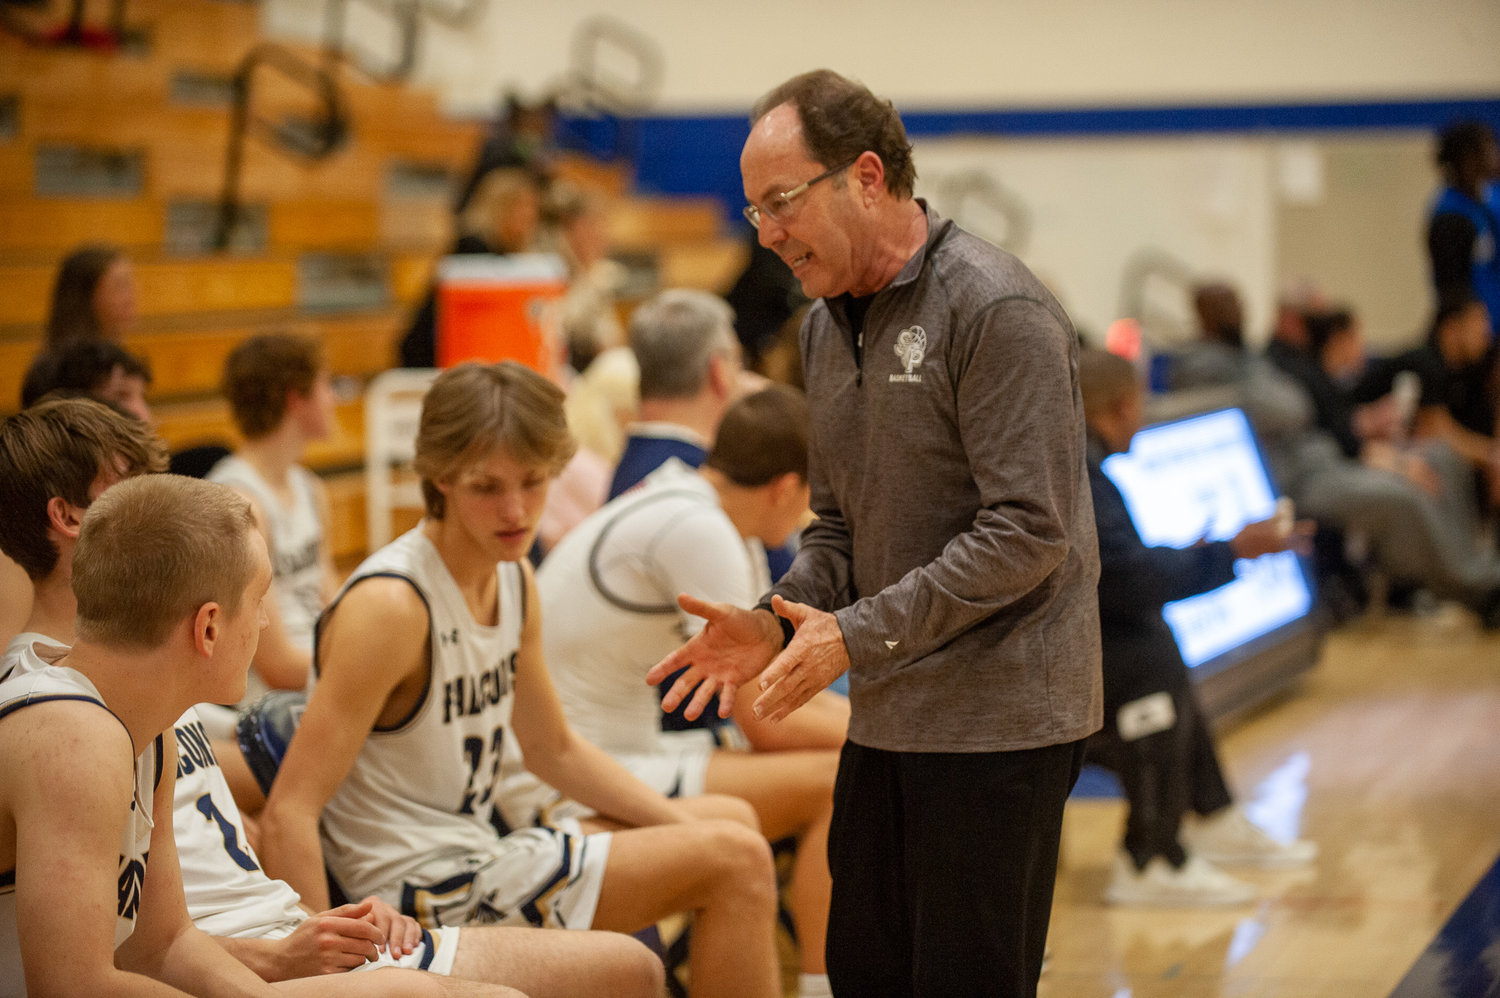 Severna Park boys basketball head coach Paul Pellicani discussed strategy with his team during the second half of his team’s win over Leonardtown.